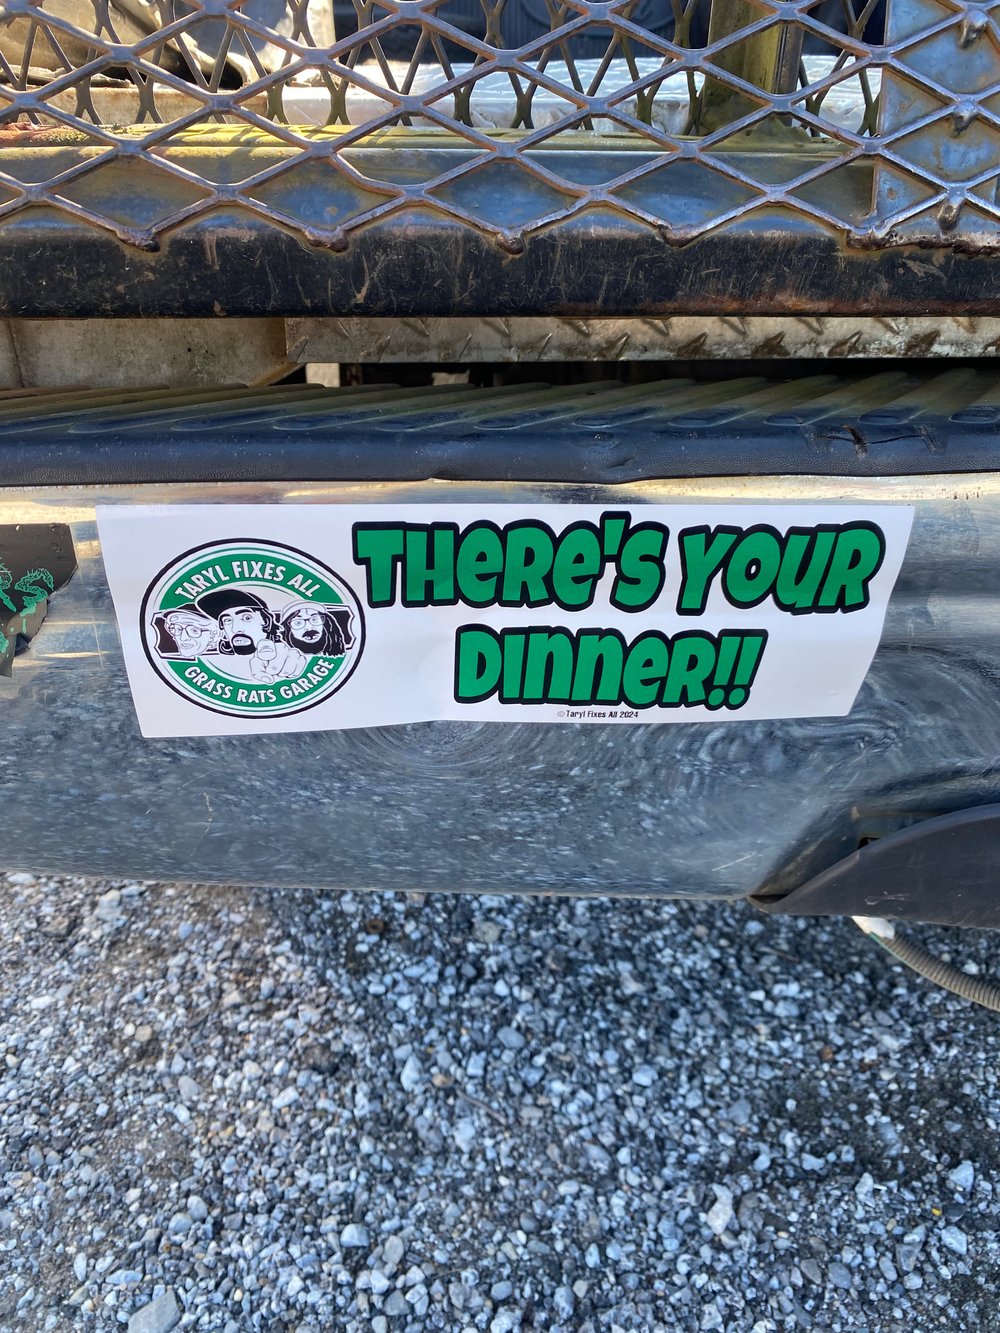 GIANT "Theres Your Dinner" Bumper Stickers!! (FREE USA SHIPPING 🇺🇸)